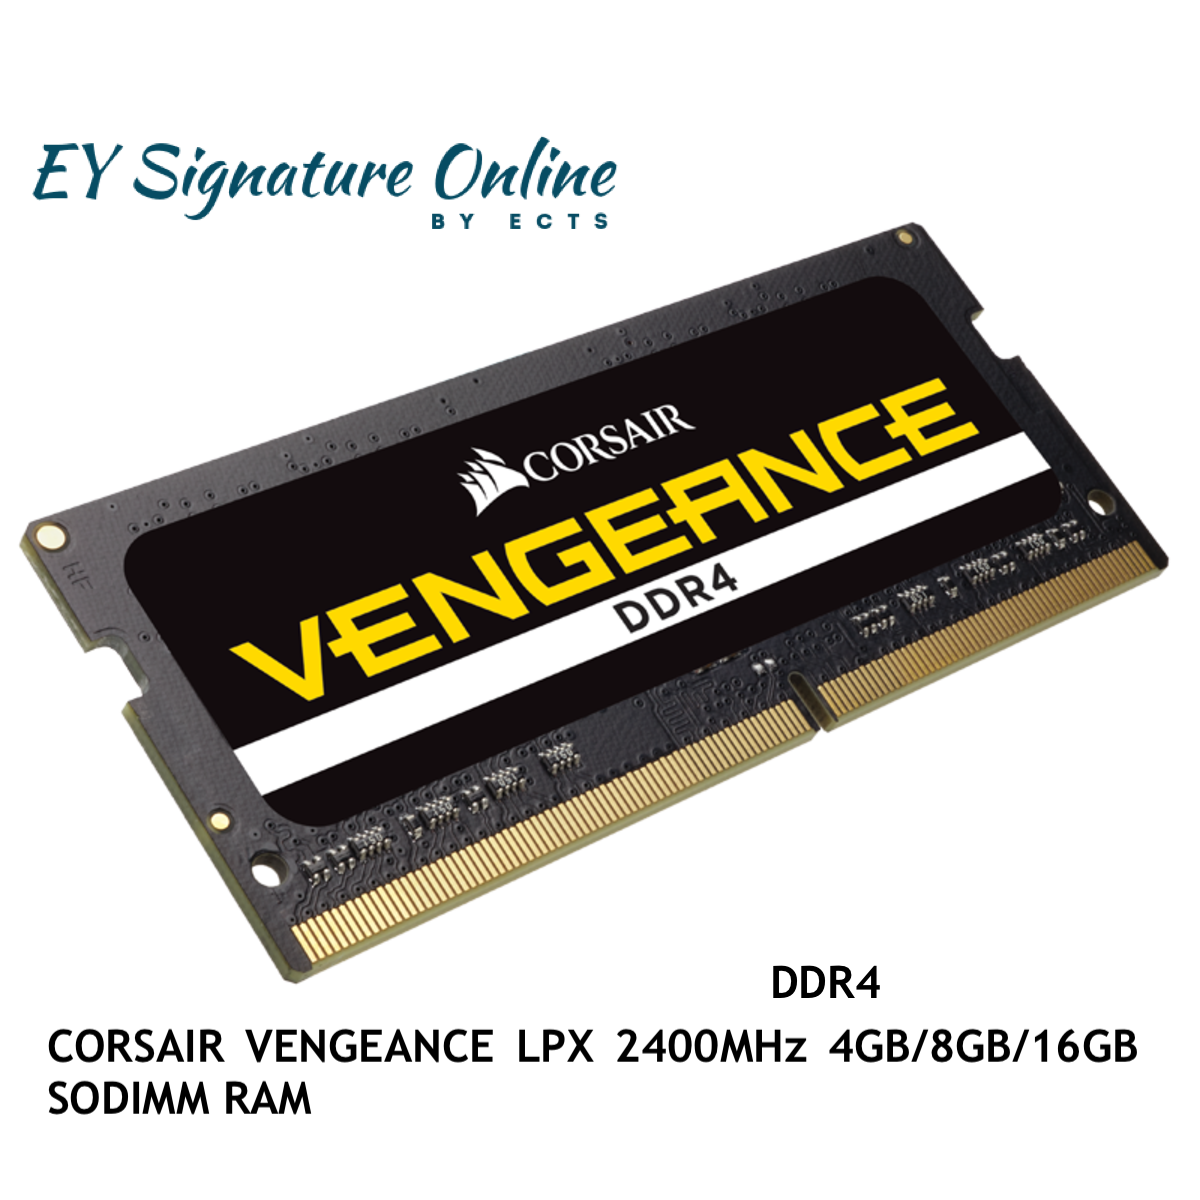 CORSAIR VENGEANCE LPX 2400MHz DDR4 4GB/8GB C16 SODIMM RAM – EY Signature  Online by ECTS